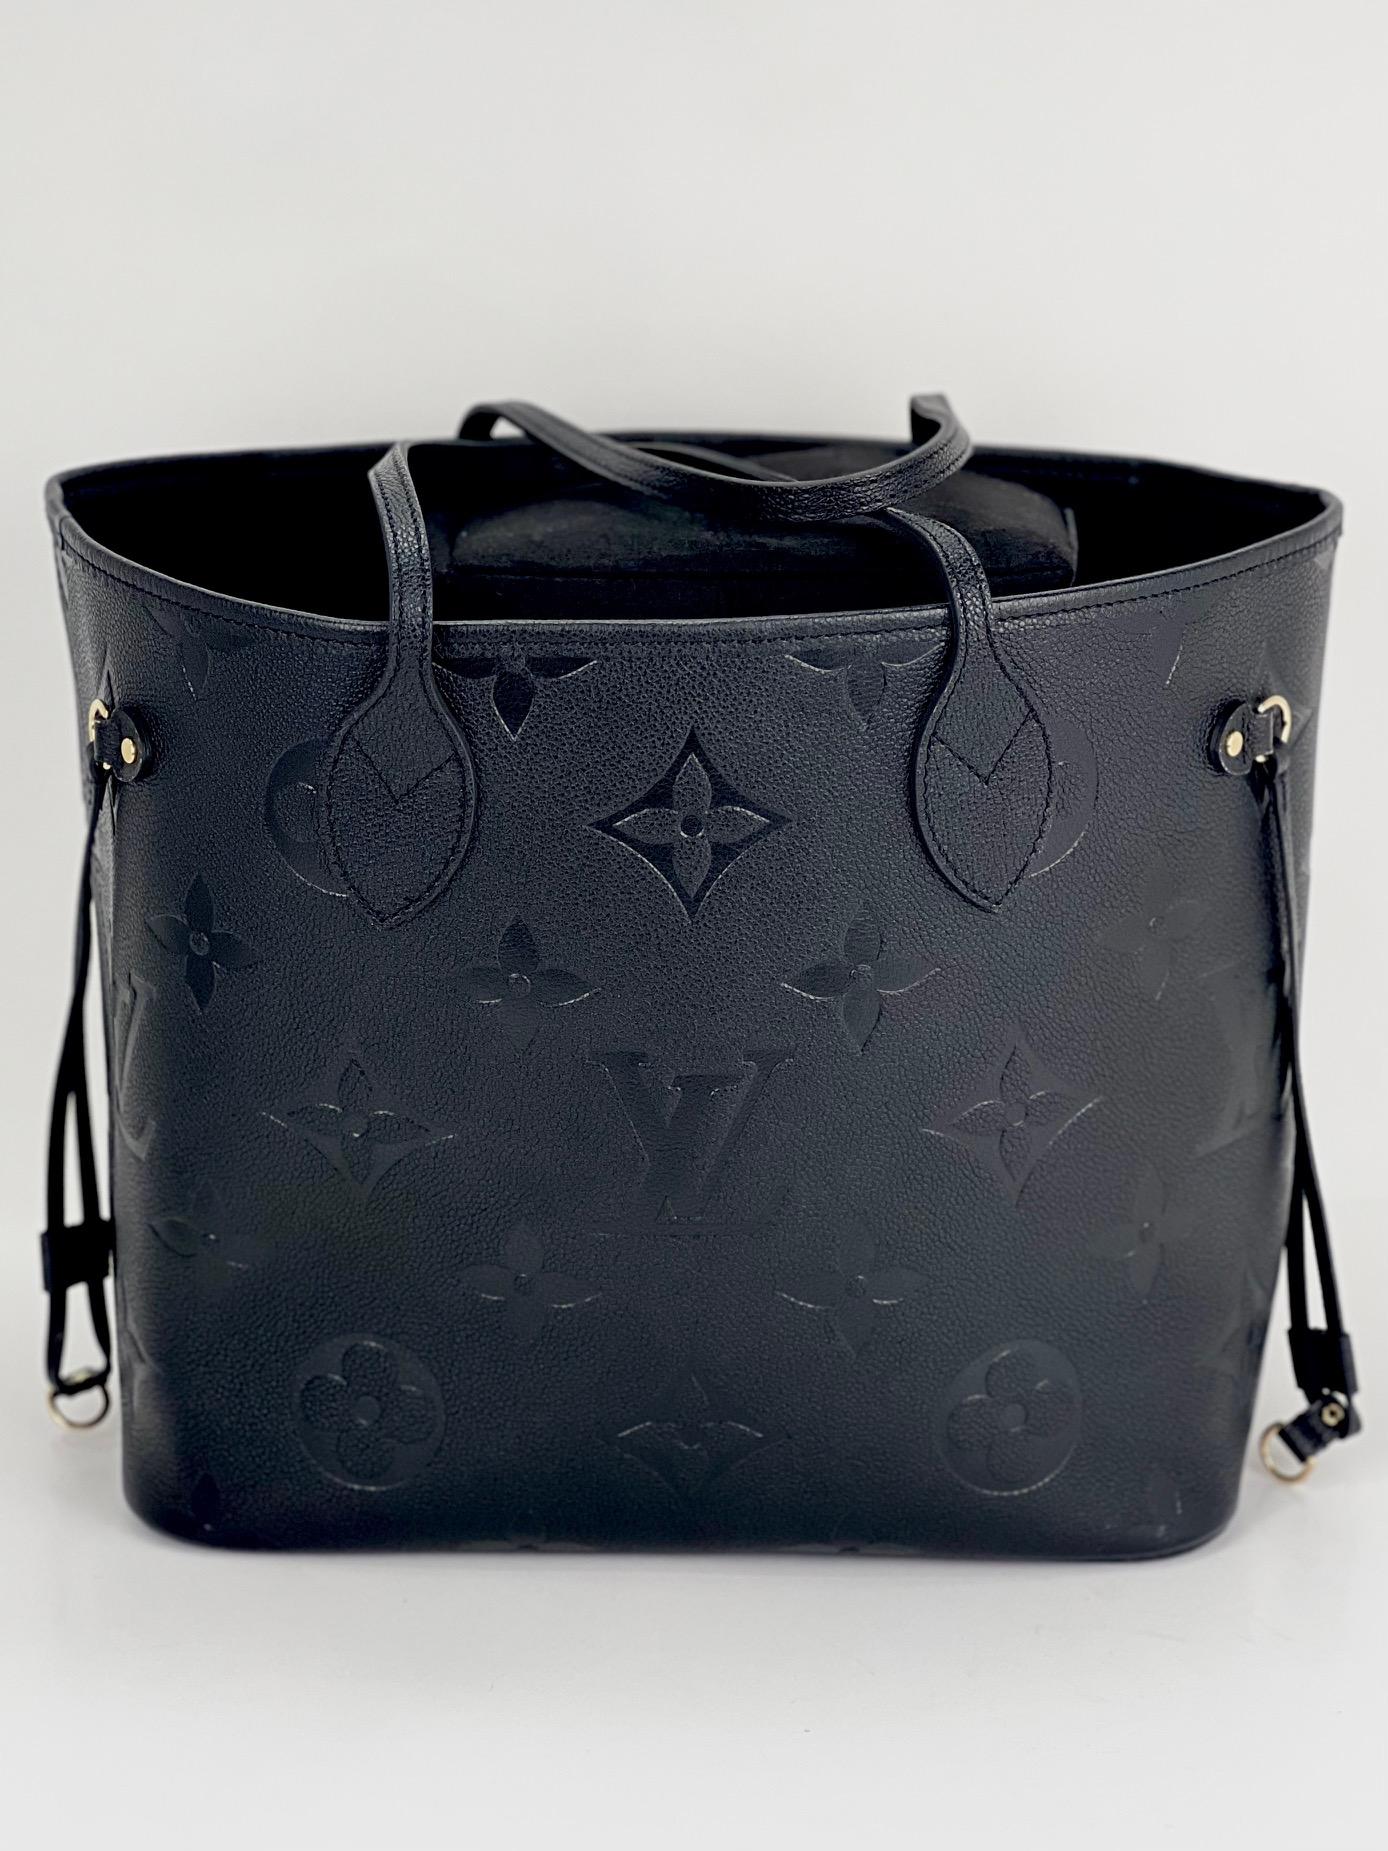 Louis Vuitton Neverfull MM Black Empreinte Leather 
W/added Insert to help keep Shape and Organize
Pre-Owned 100% Authentic
RATING: A+...excellent, near mint, only slight
signs of wear
MATERIAL: empreinte leather 
HANDLE:  double leather 
PIPING &